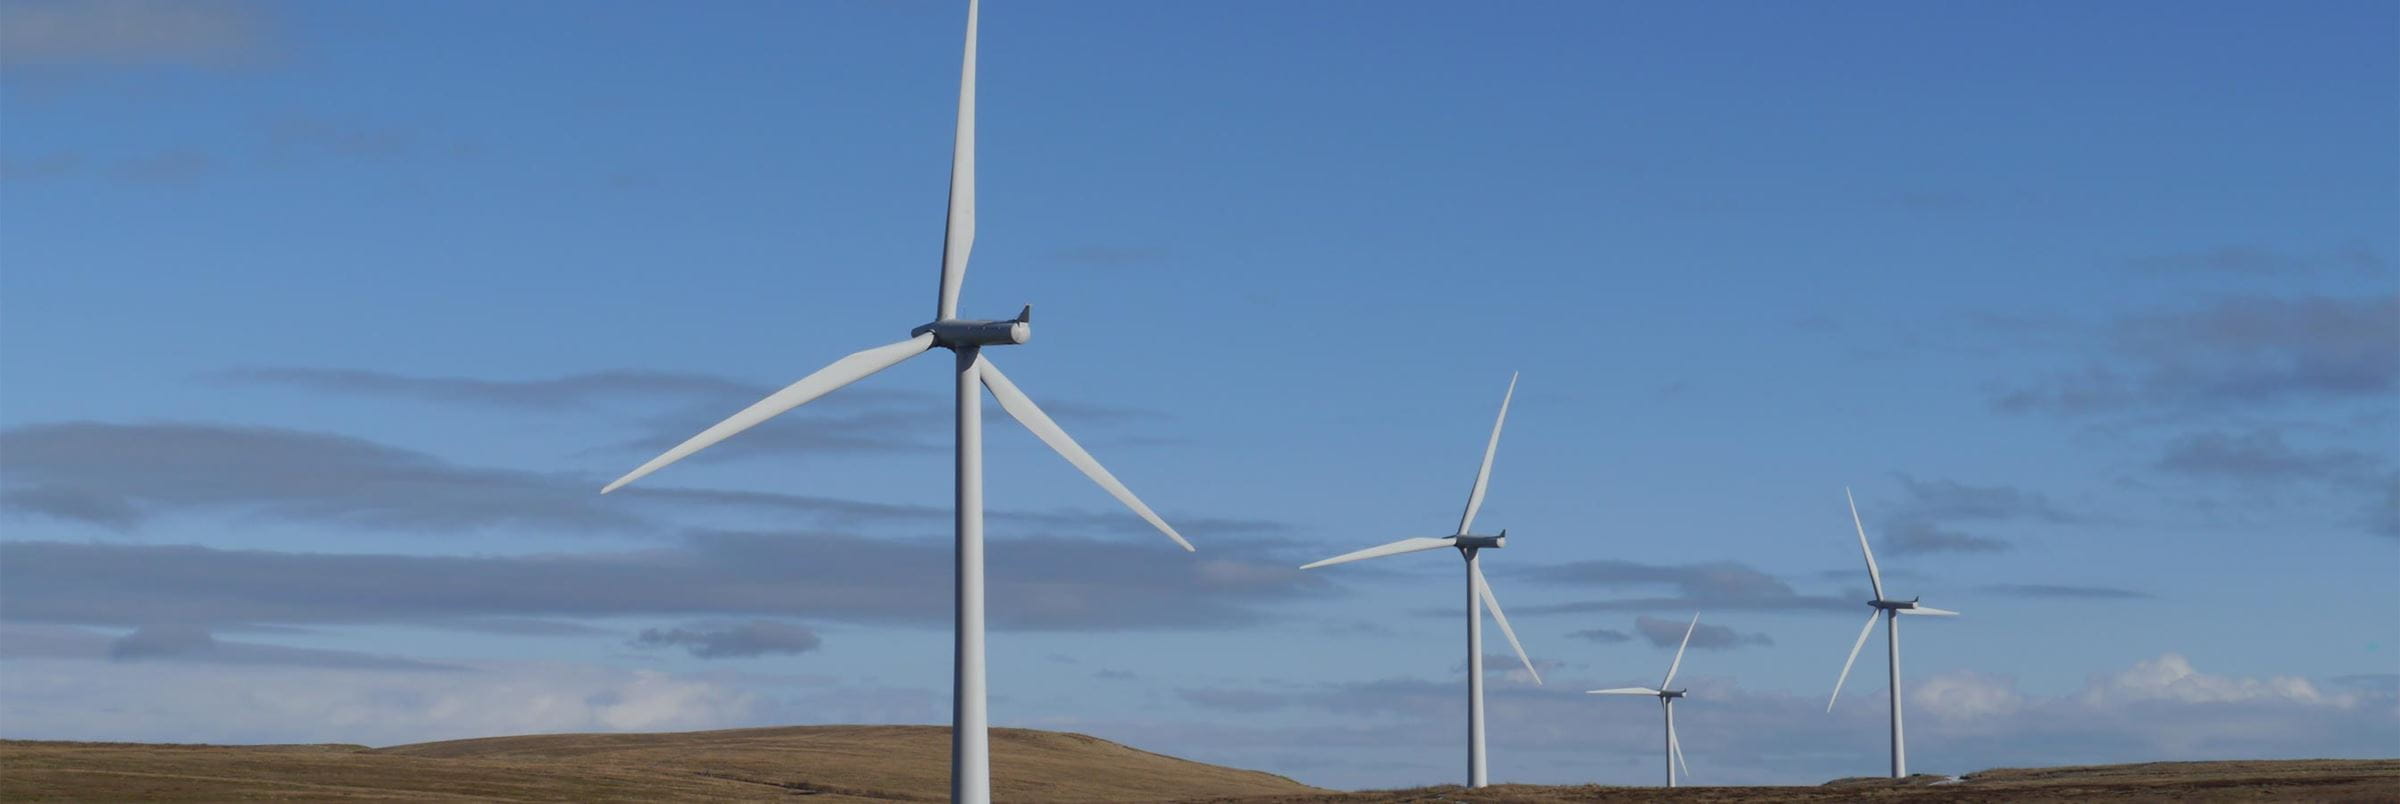 wind turbines situated on grassy hills, with blue sky dotted with clouds in the background